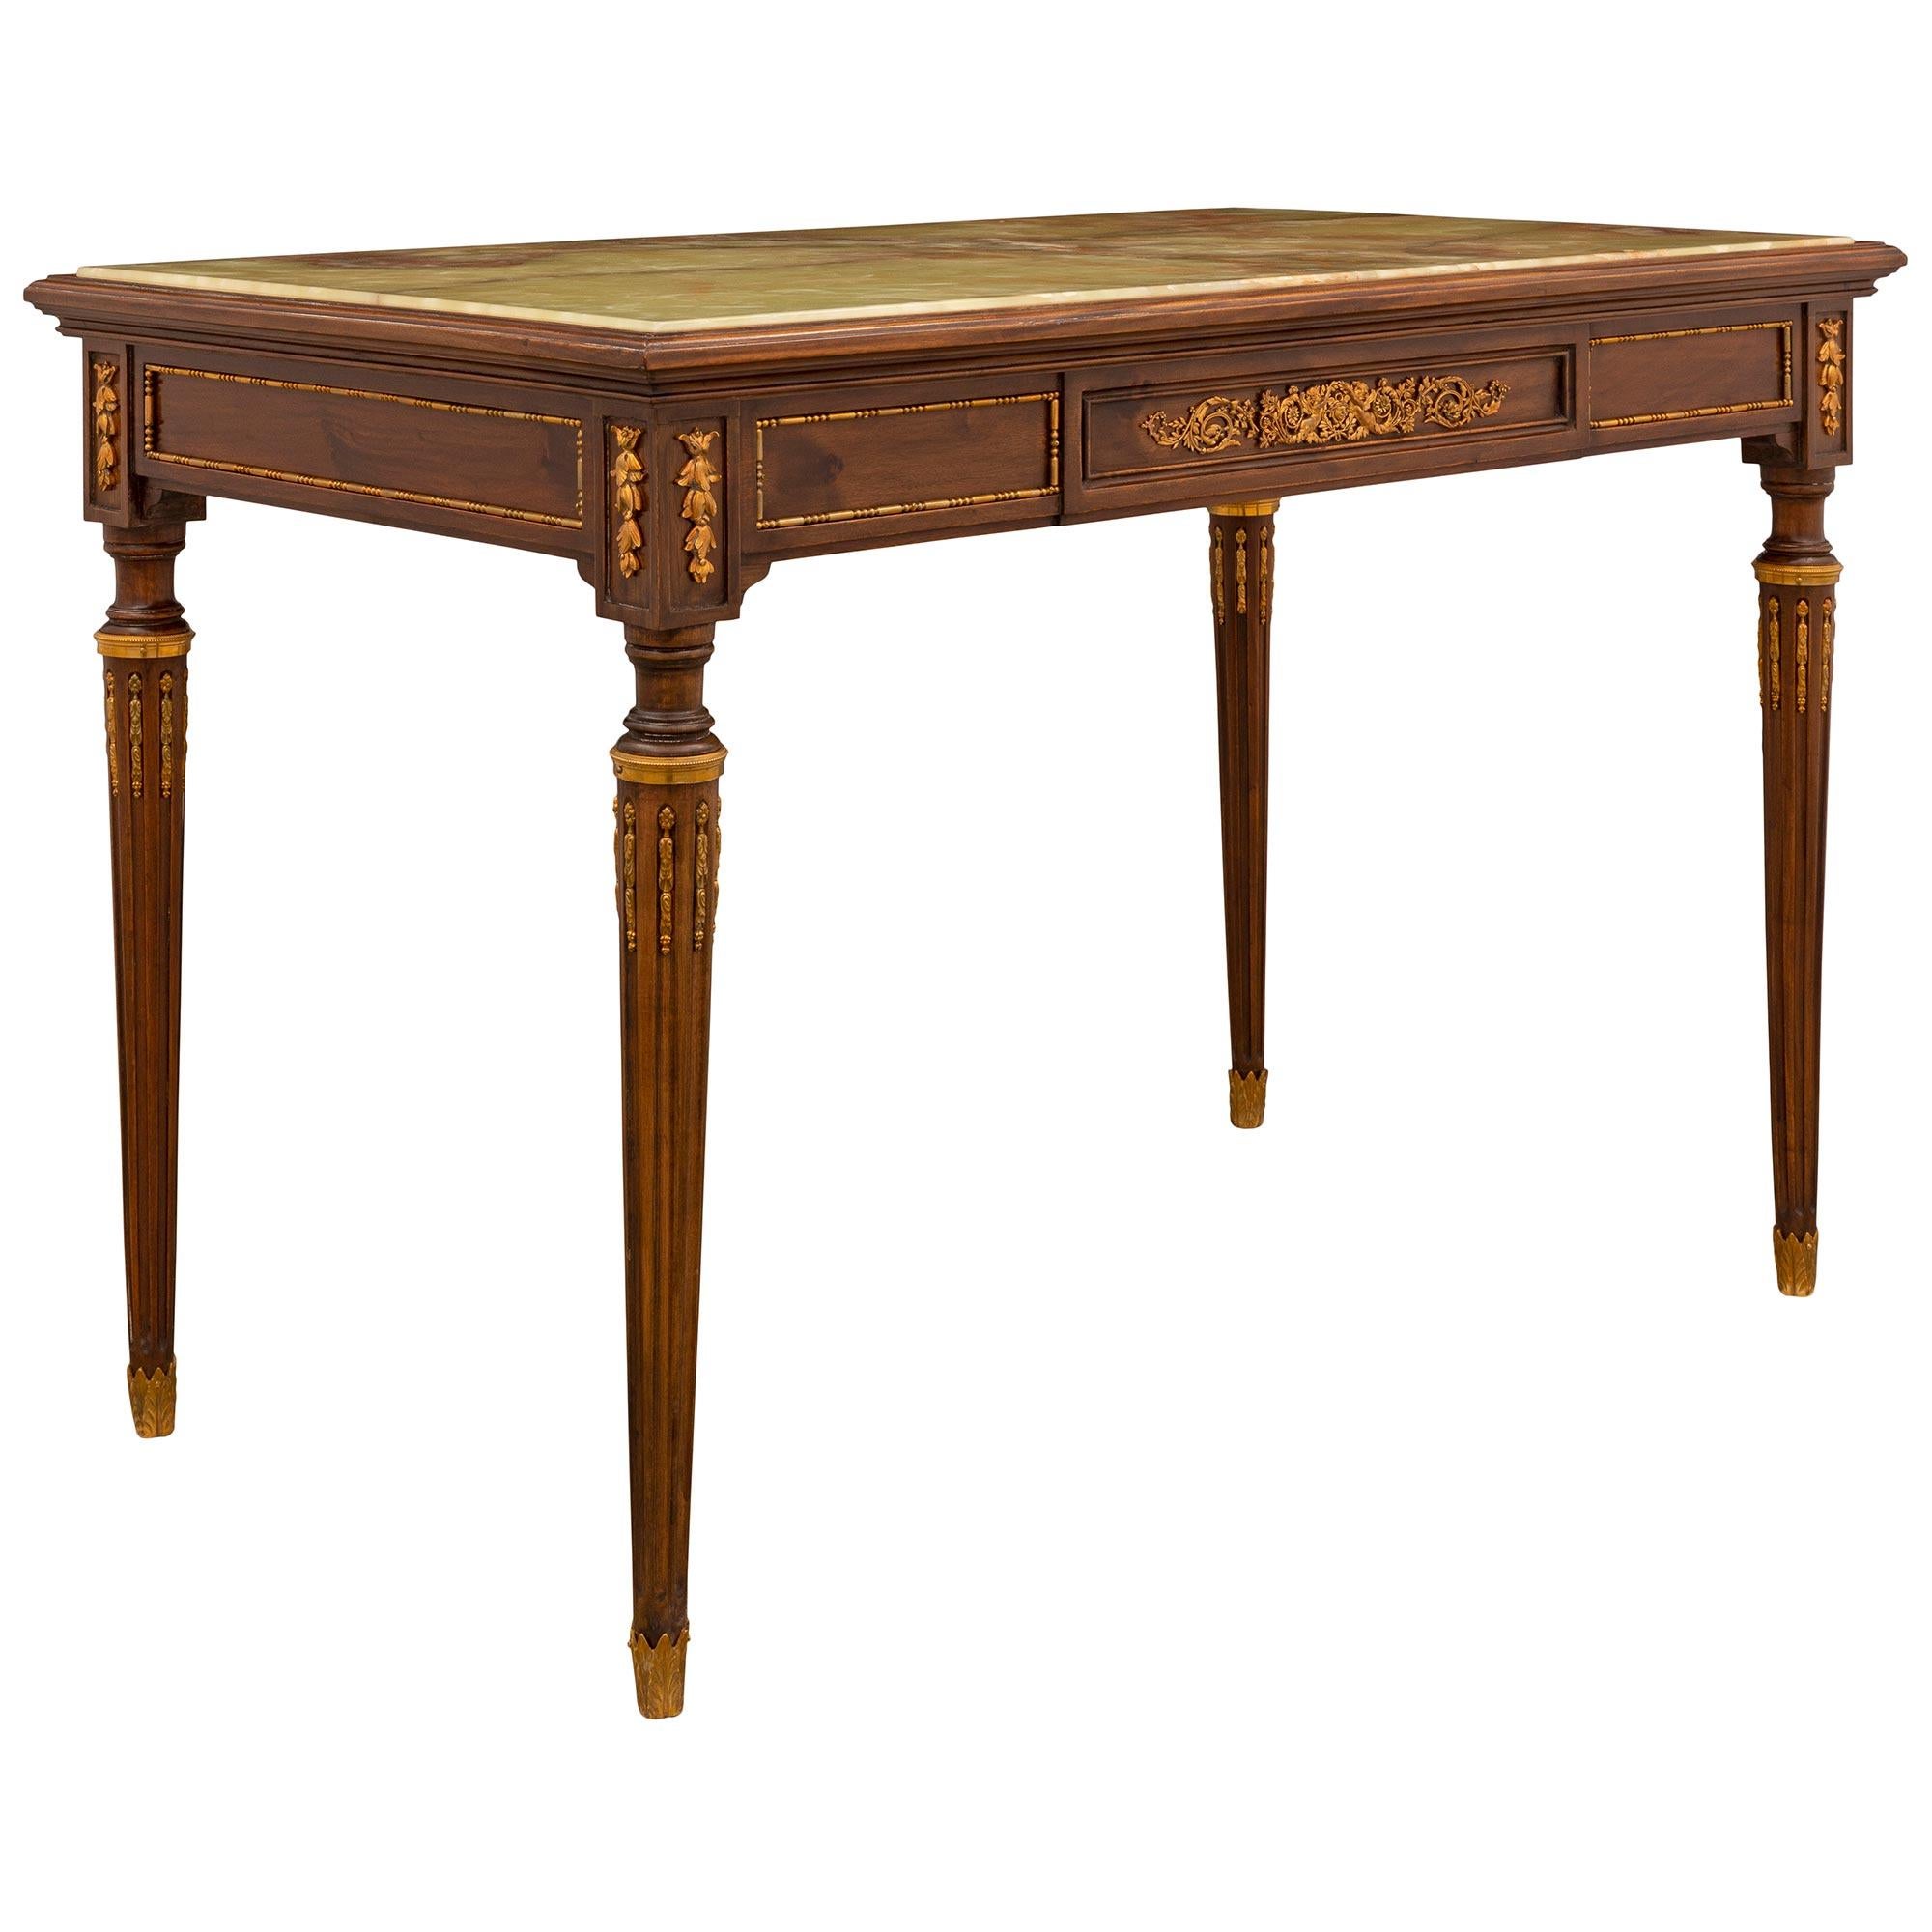 French 19th Century Louis XVI Style Mahogany, Onyx and Ormolu Table In Good Condition For Sale In West Palm Beach, FL